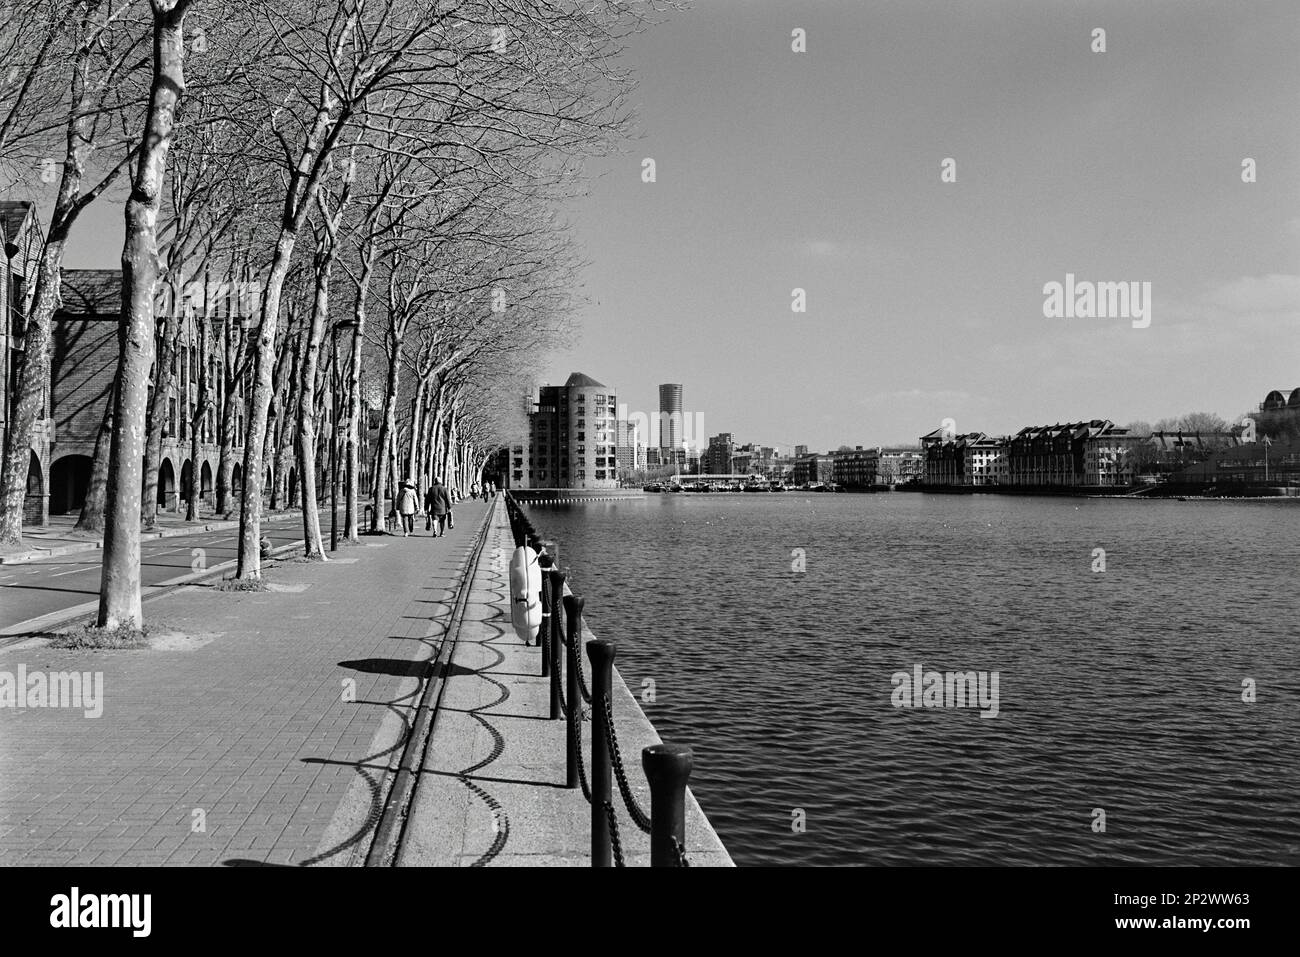 Brunswick Quay on Greenland Dock, London UK, looking east towards the Isle of Dogs, in monochrome Stock Photo